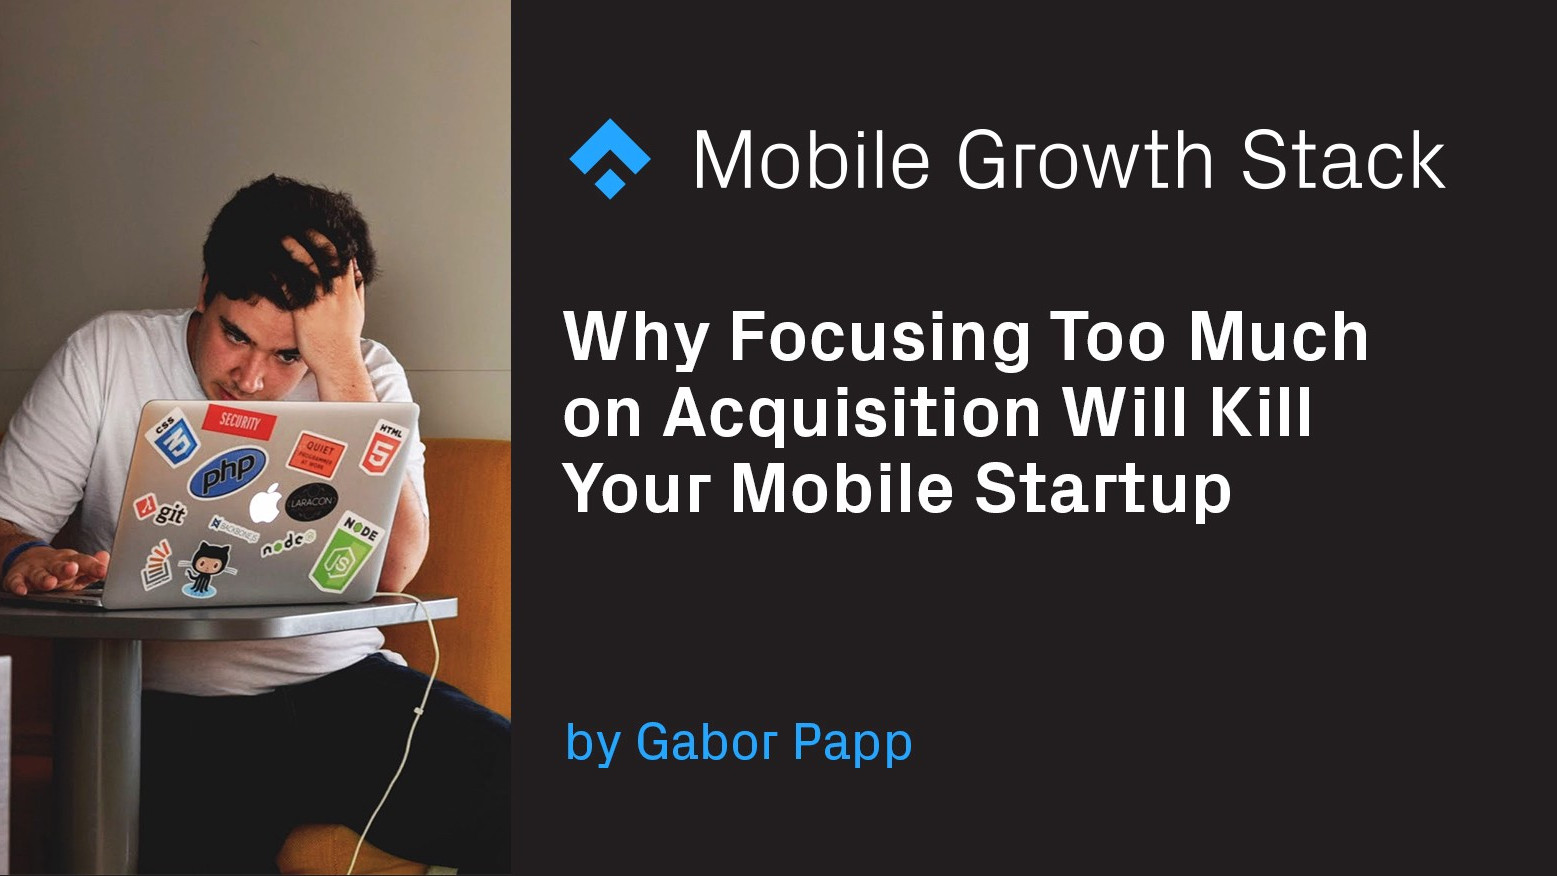 Why Focusing Too Much on Acquisition Will Kill Your Mobile Startup